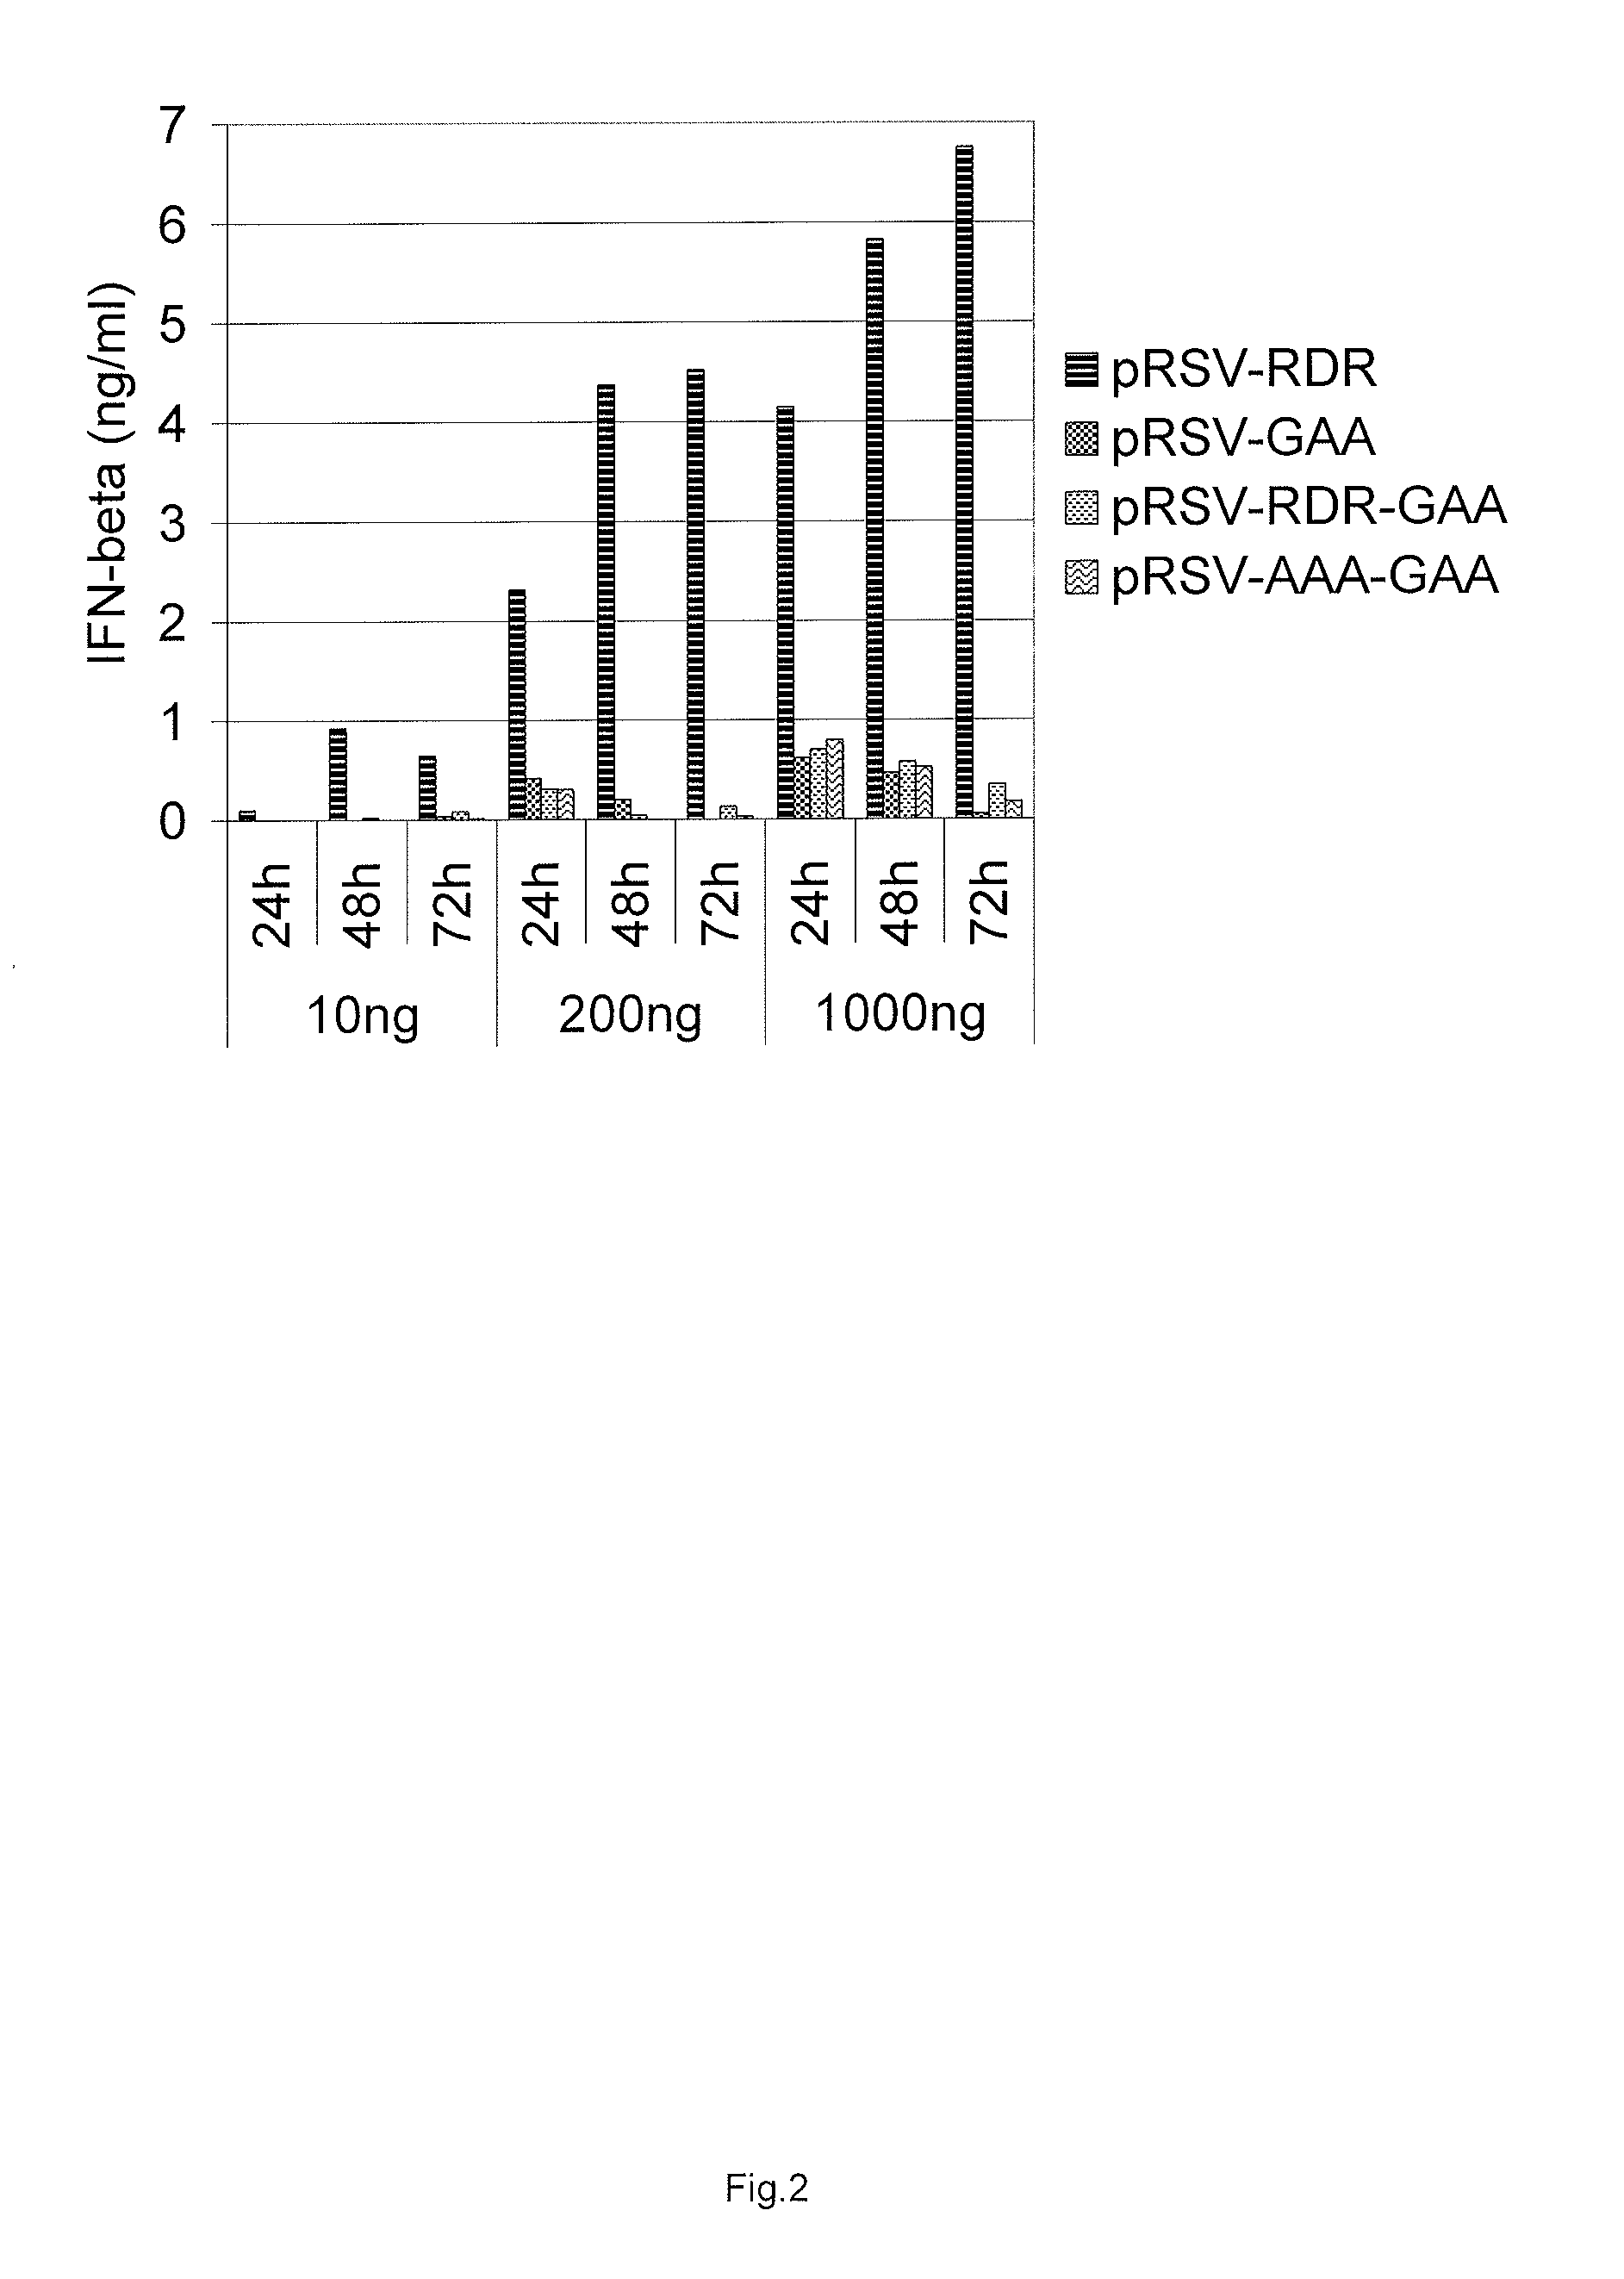 Expression vector encoding alphavirus replicase and the use thereof as immunological adjuvant